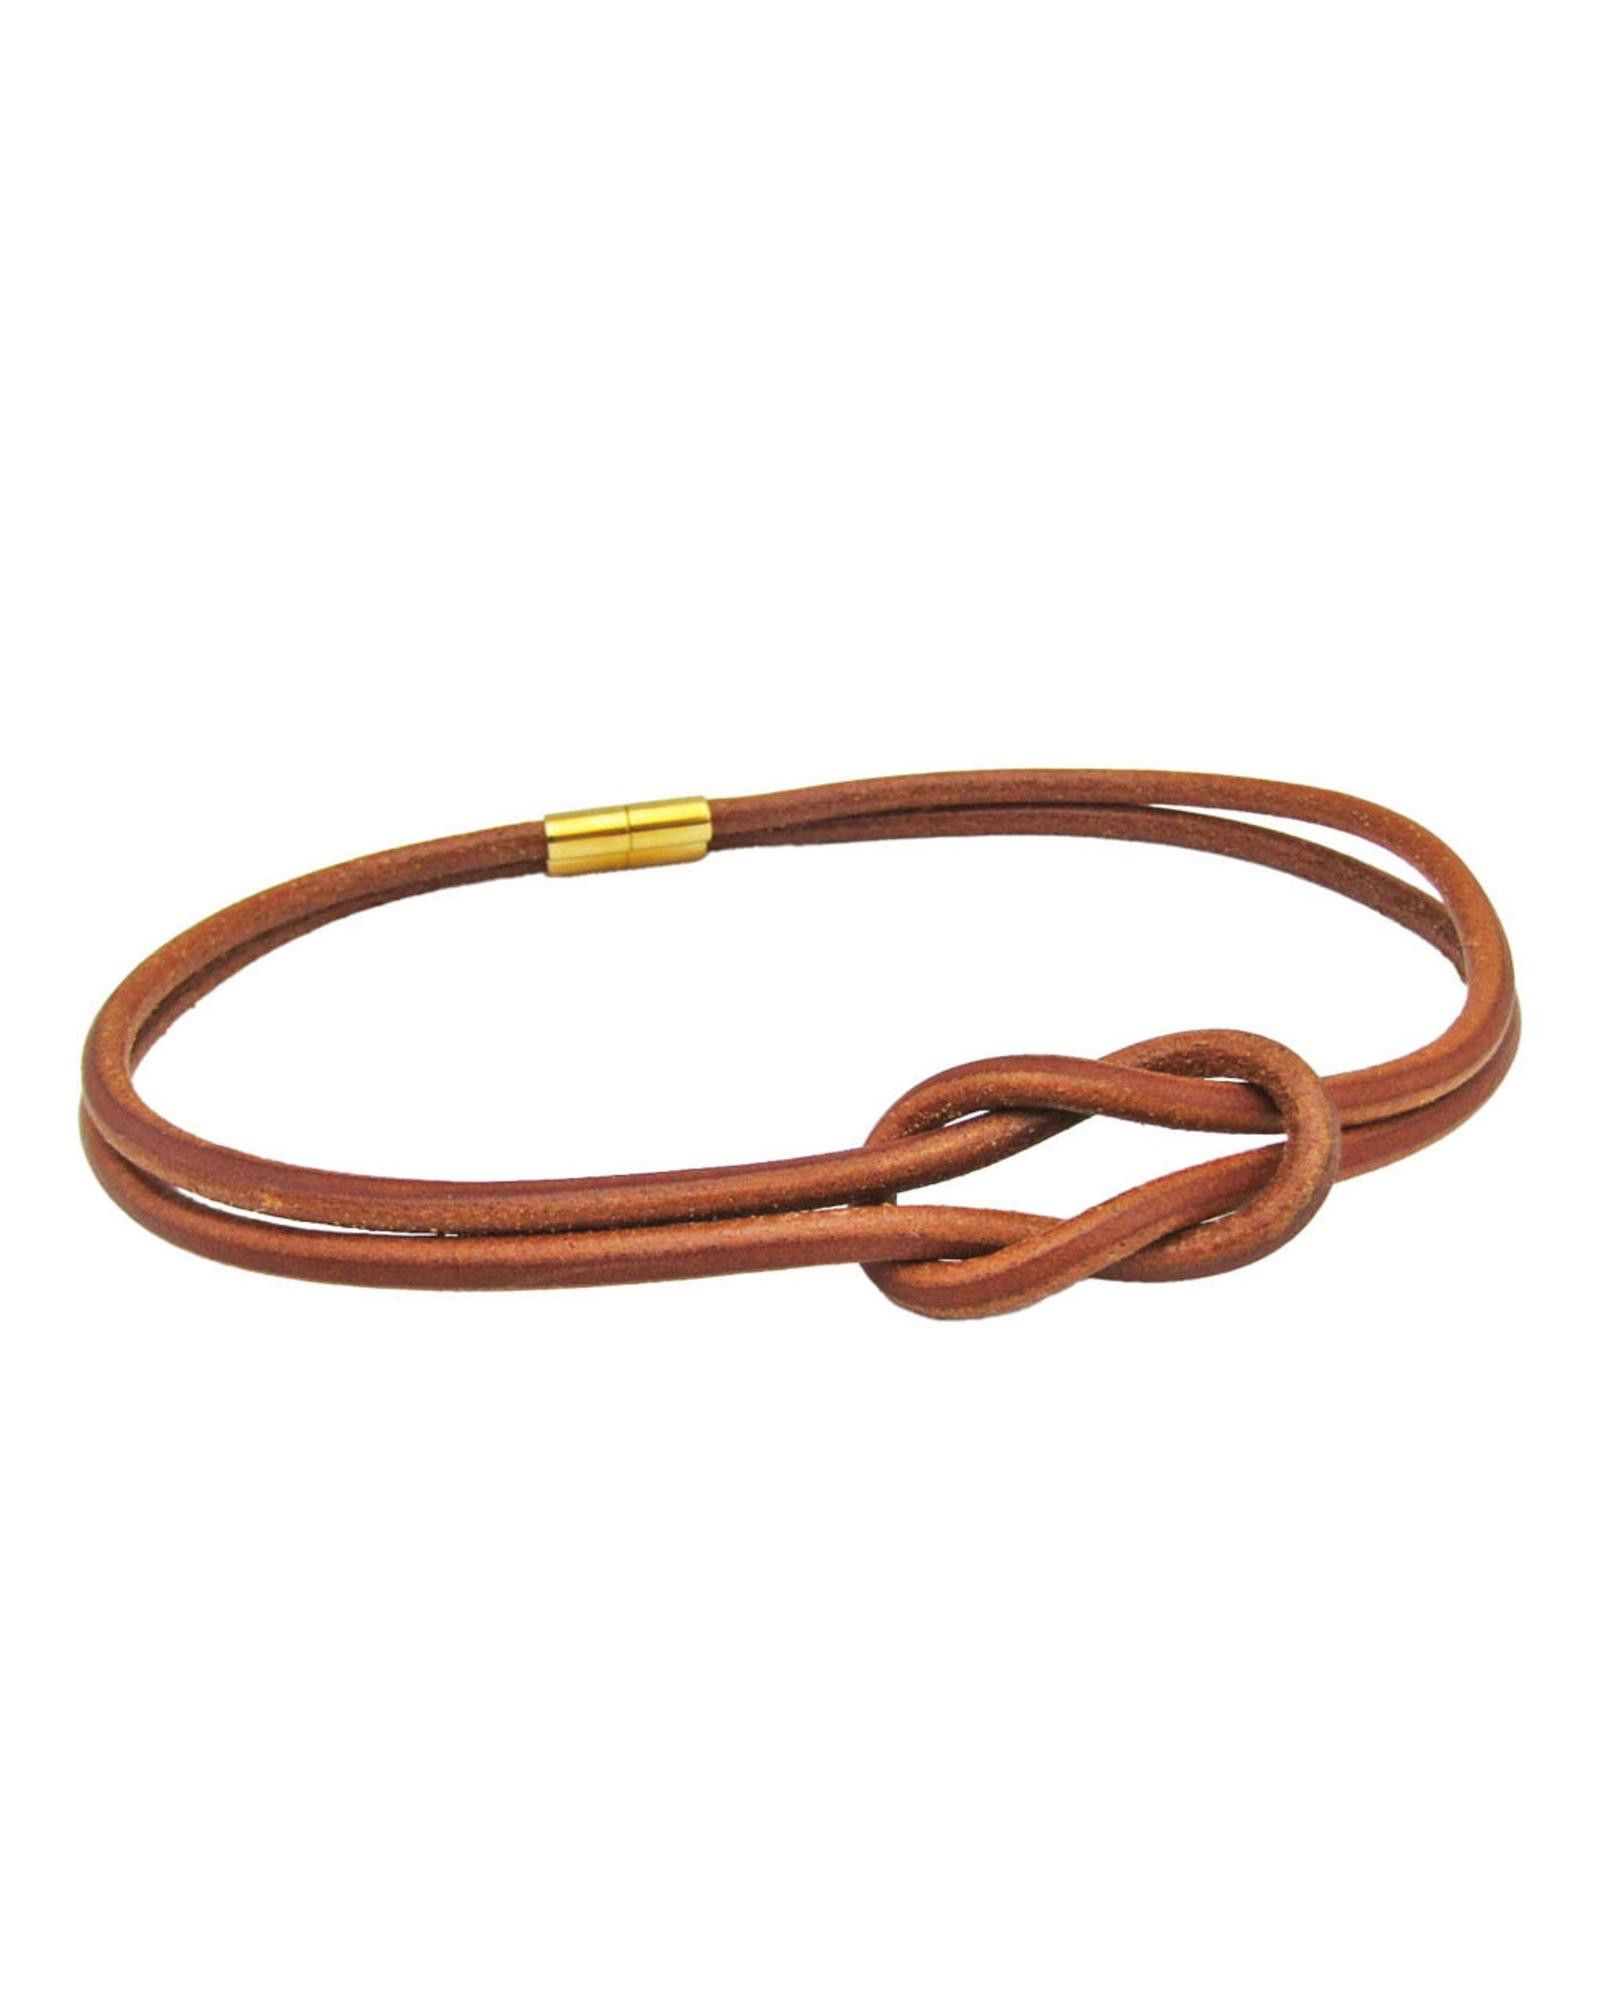 image of Hermes Versatile Leather Choker Necklace With Gold Accents in Brown, Women's